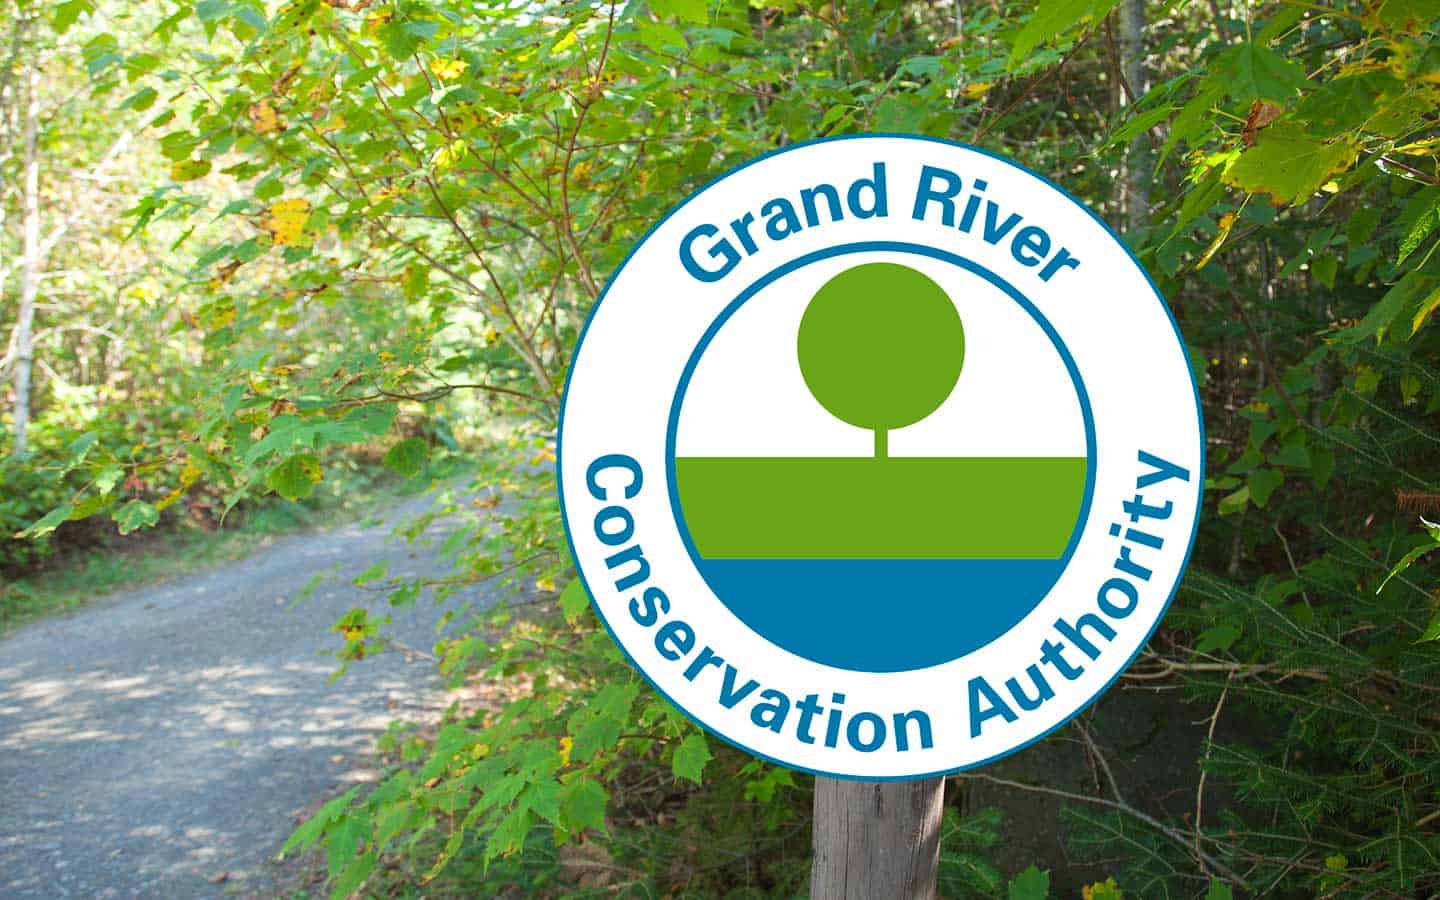 Some GRCA location to remain open for winter access